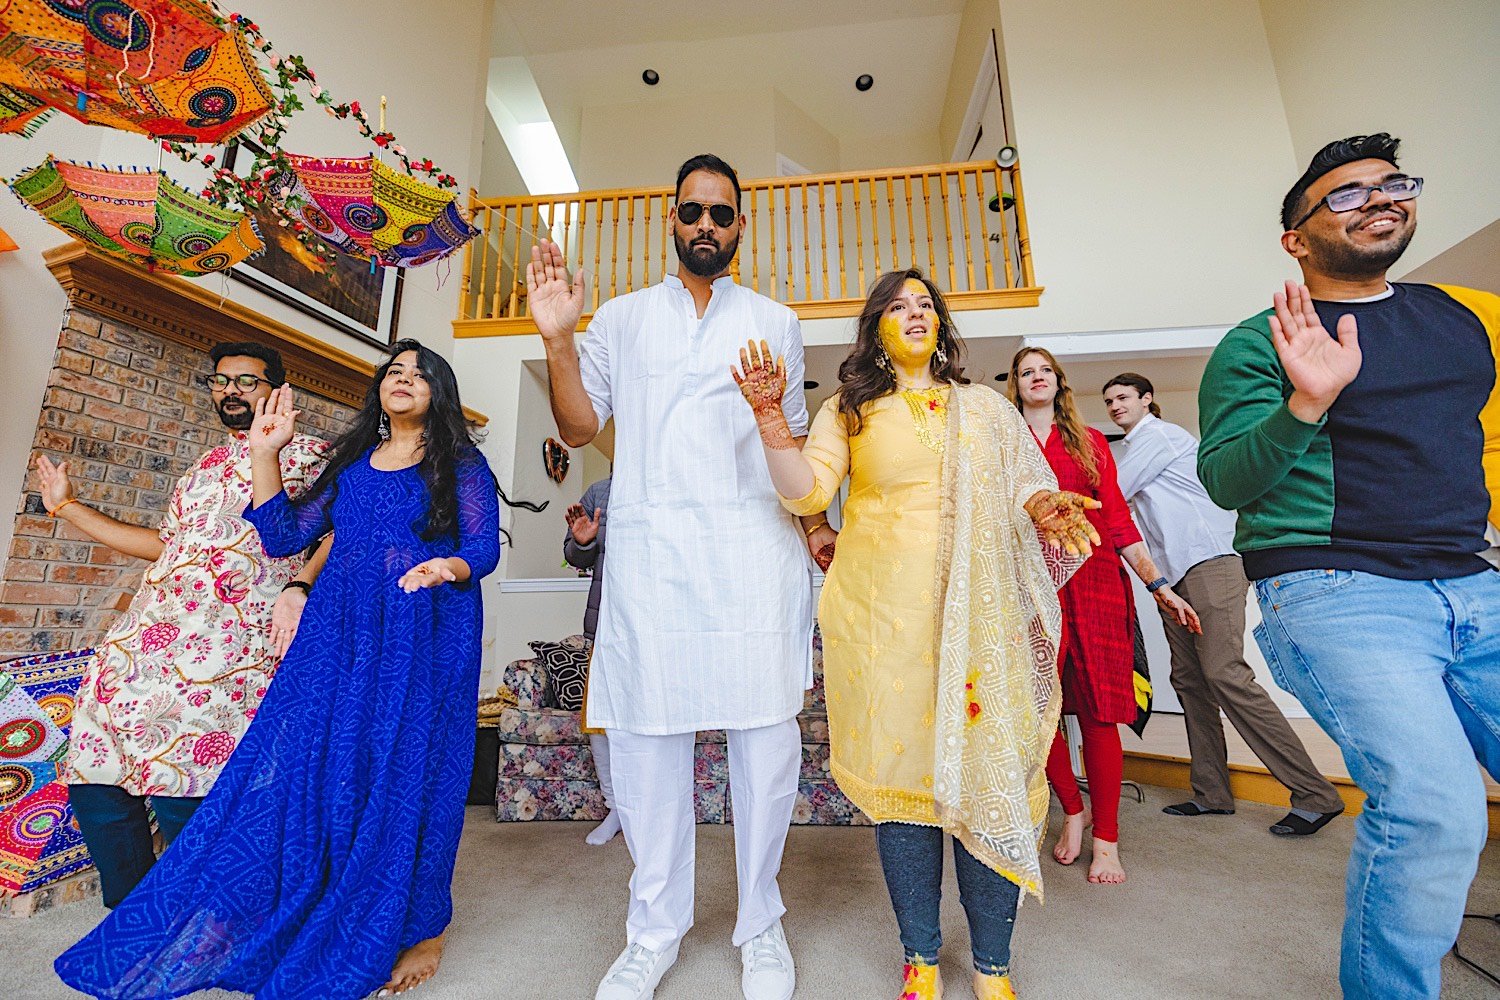 Bride, groom and wedding party all dance together at traditional Haldi celebration